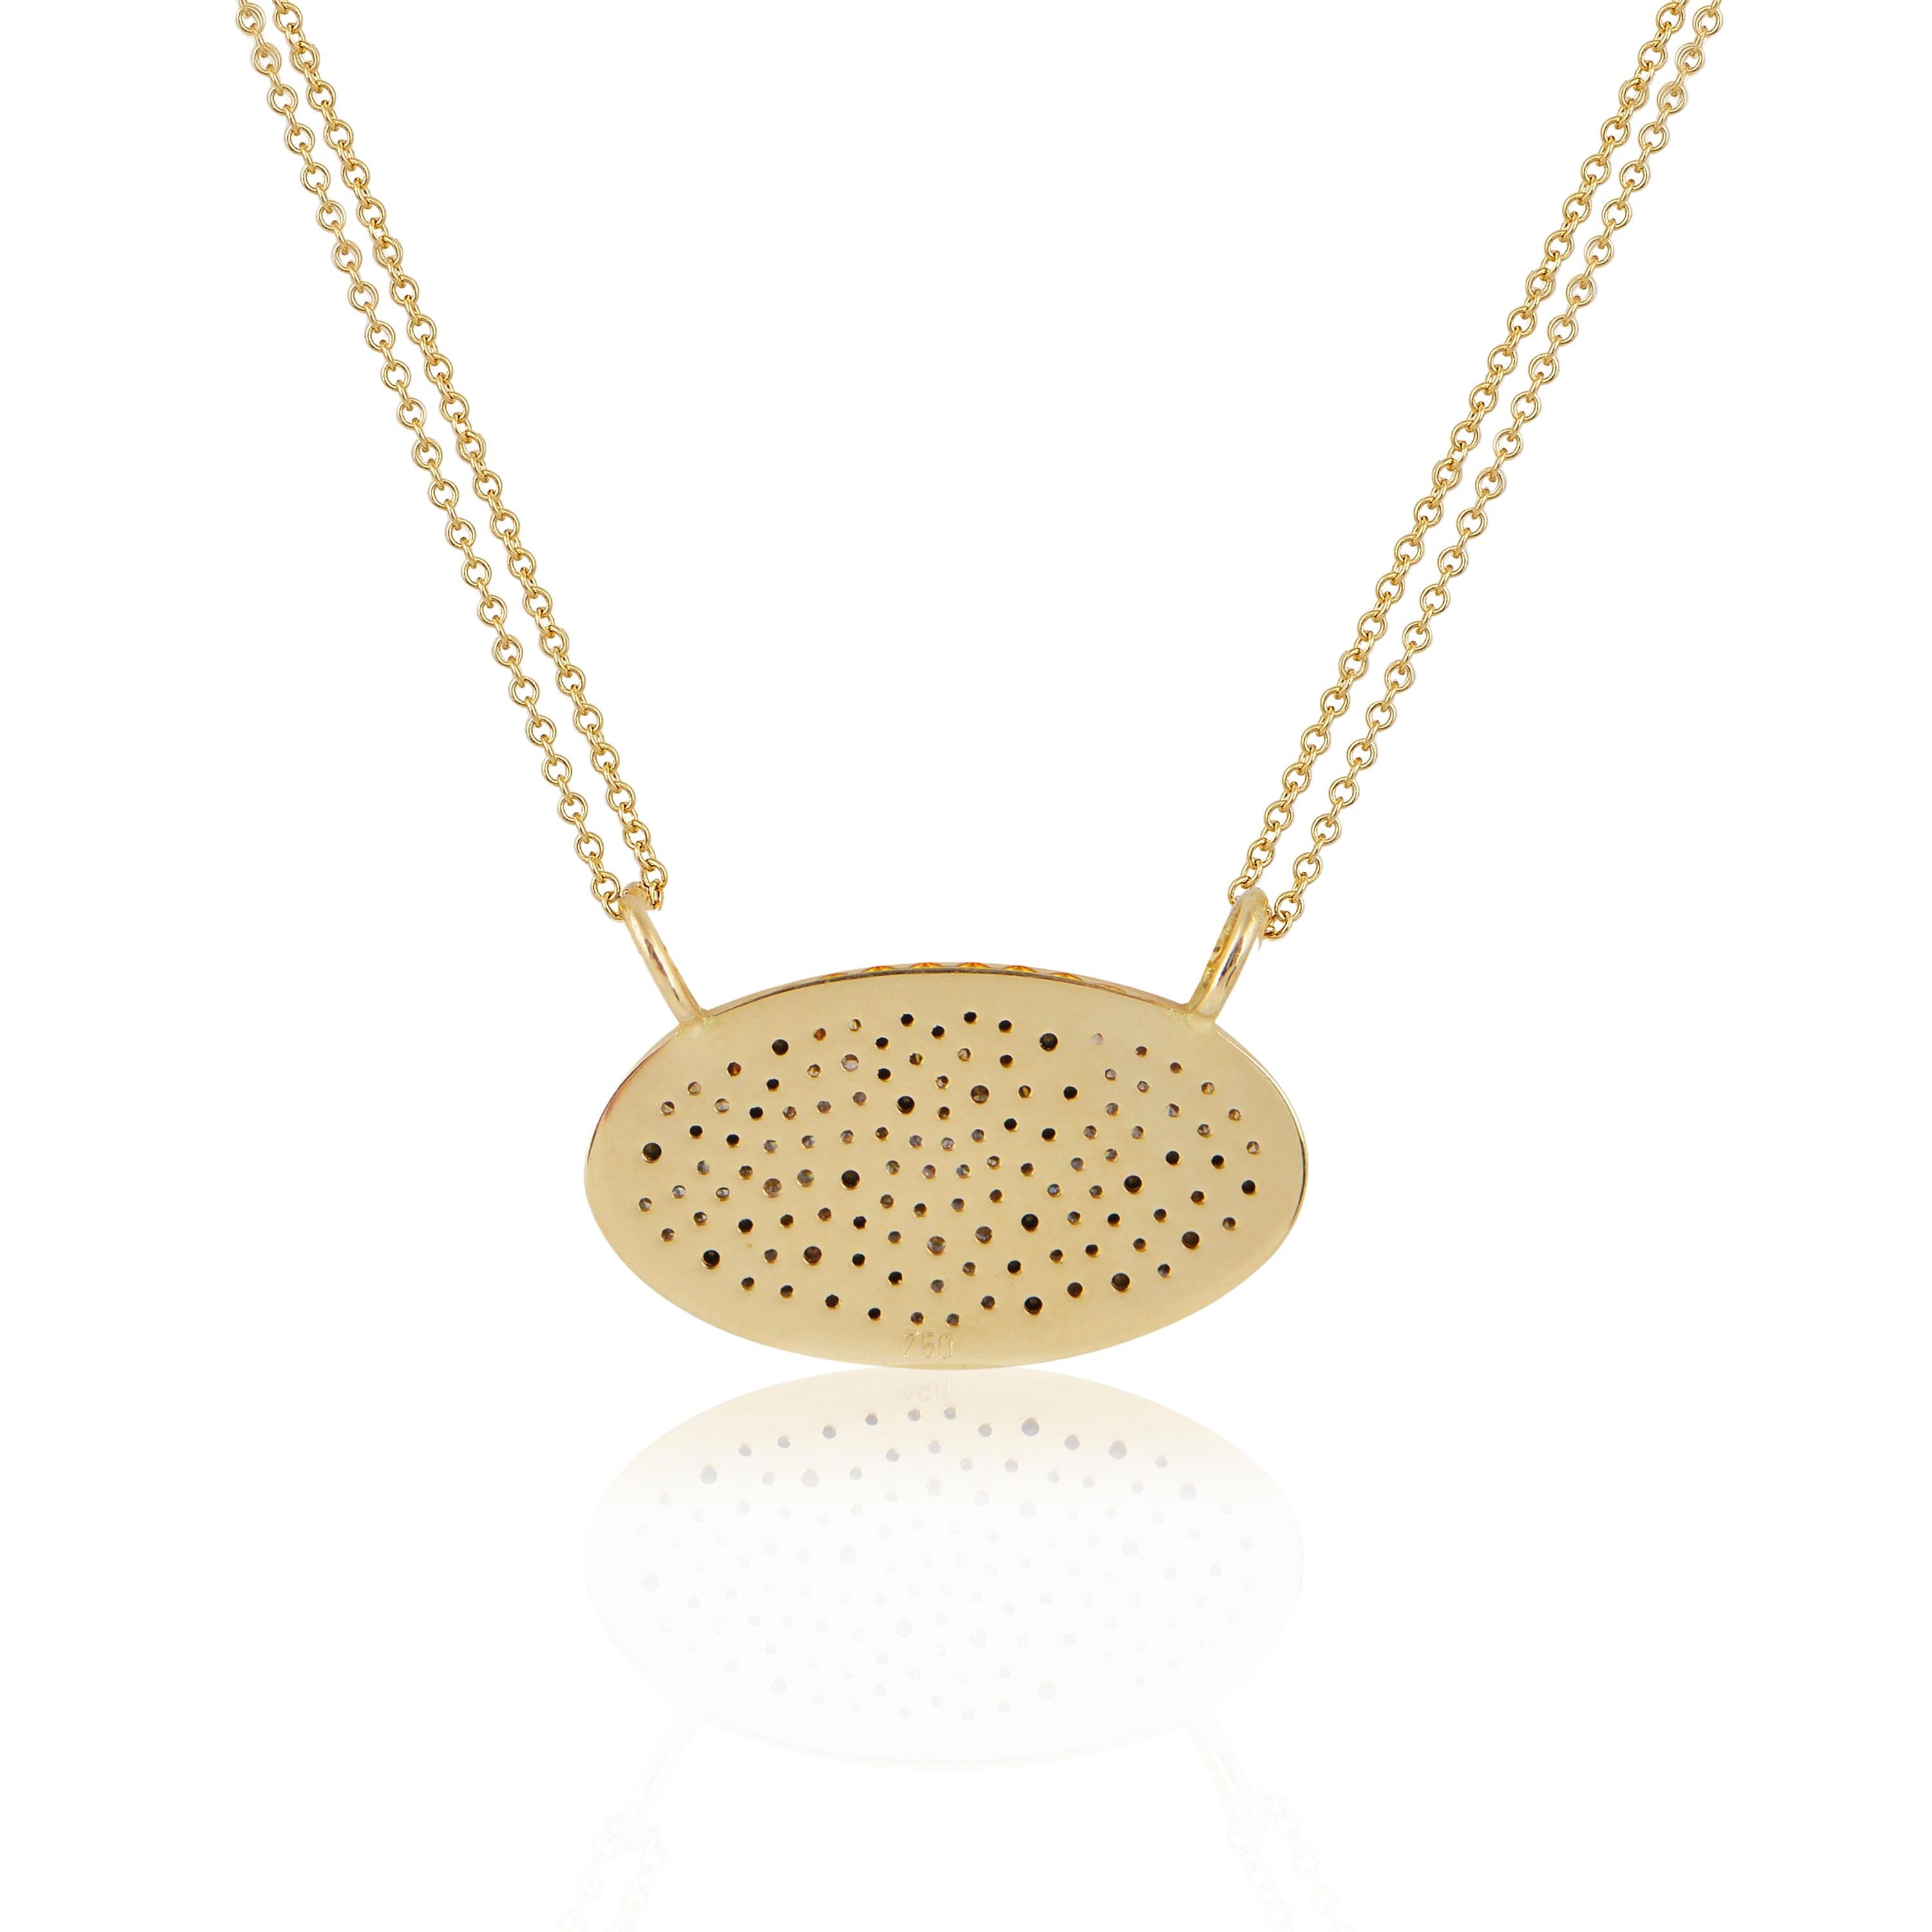 Designer: Alexia Gryllaki

Dimensions: motif 23x13mm, double-chain 800mm (half when folded)
Weight: approximately 5.9g 
Barcode: NEX2002


Leopard print oval pendant in 18 karat yellow gold with a double-chain and mosaic pavé made of round